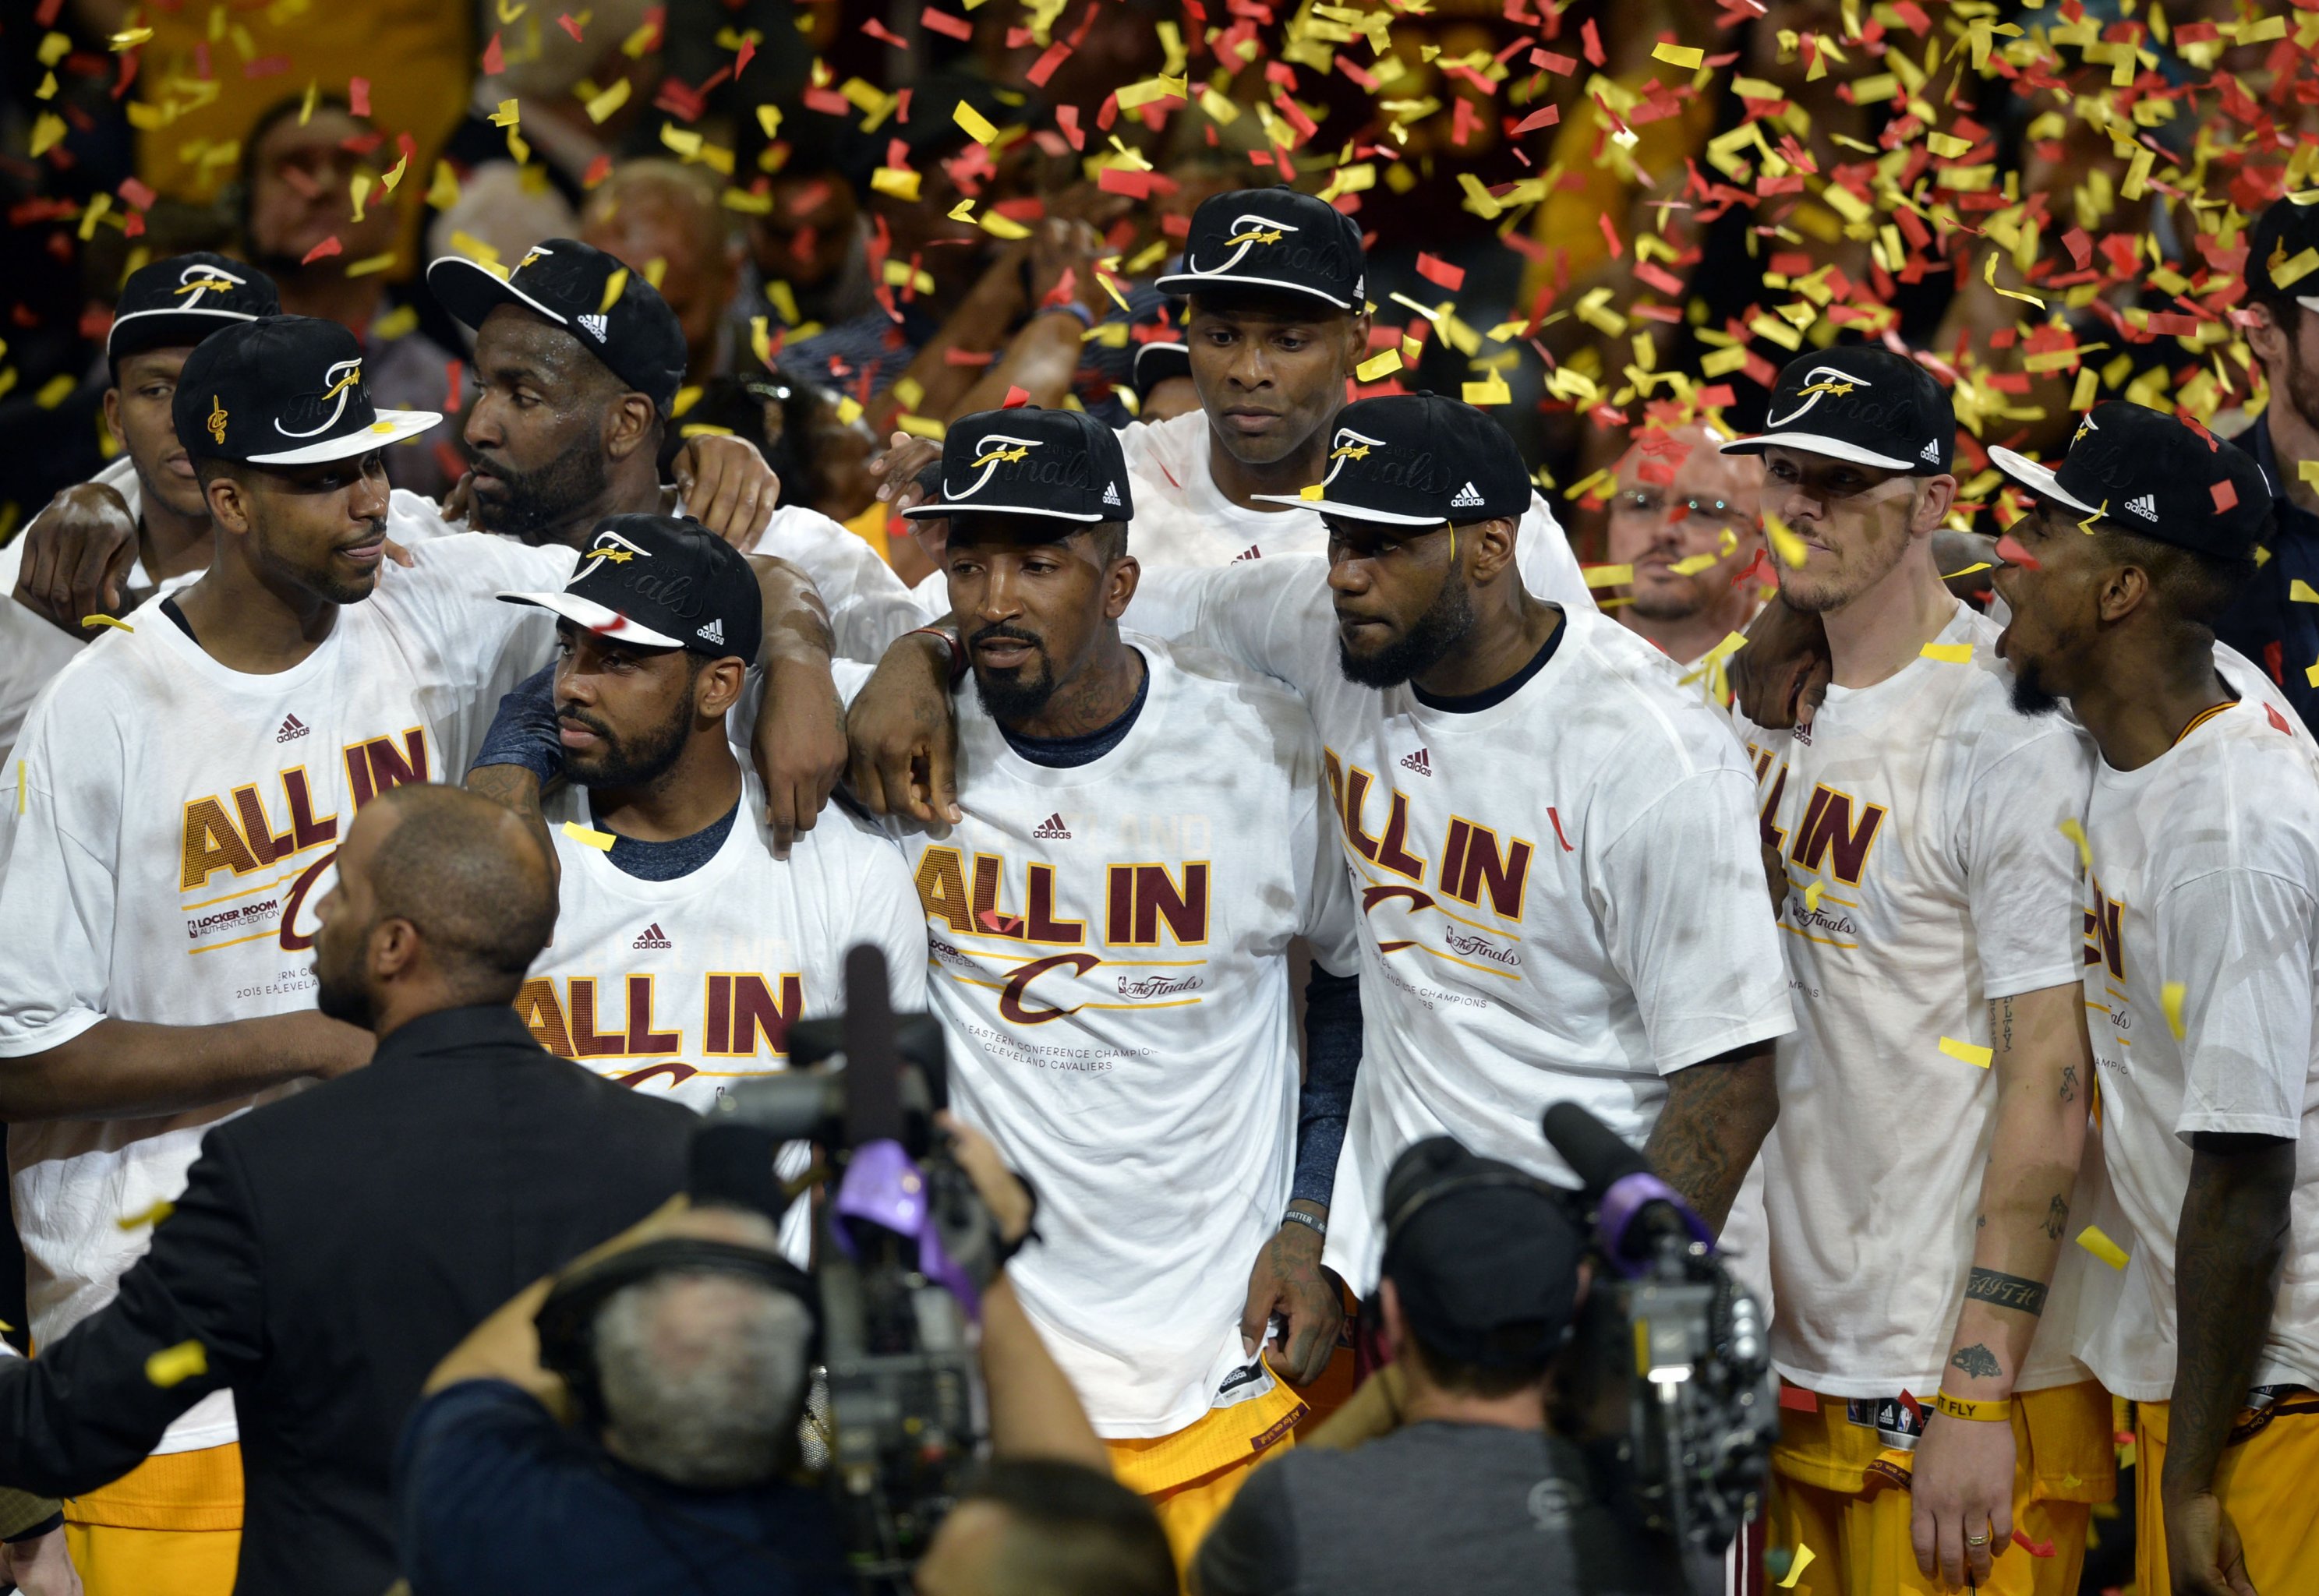 Cleveland Cavaliers 2007 NBA Finals roster: Where are they now? (photos,  videos) 